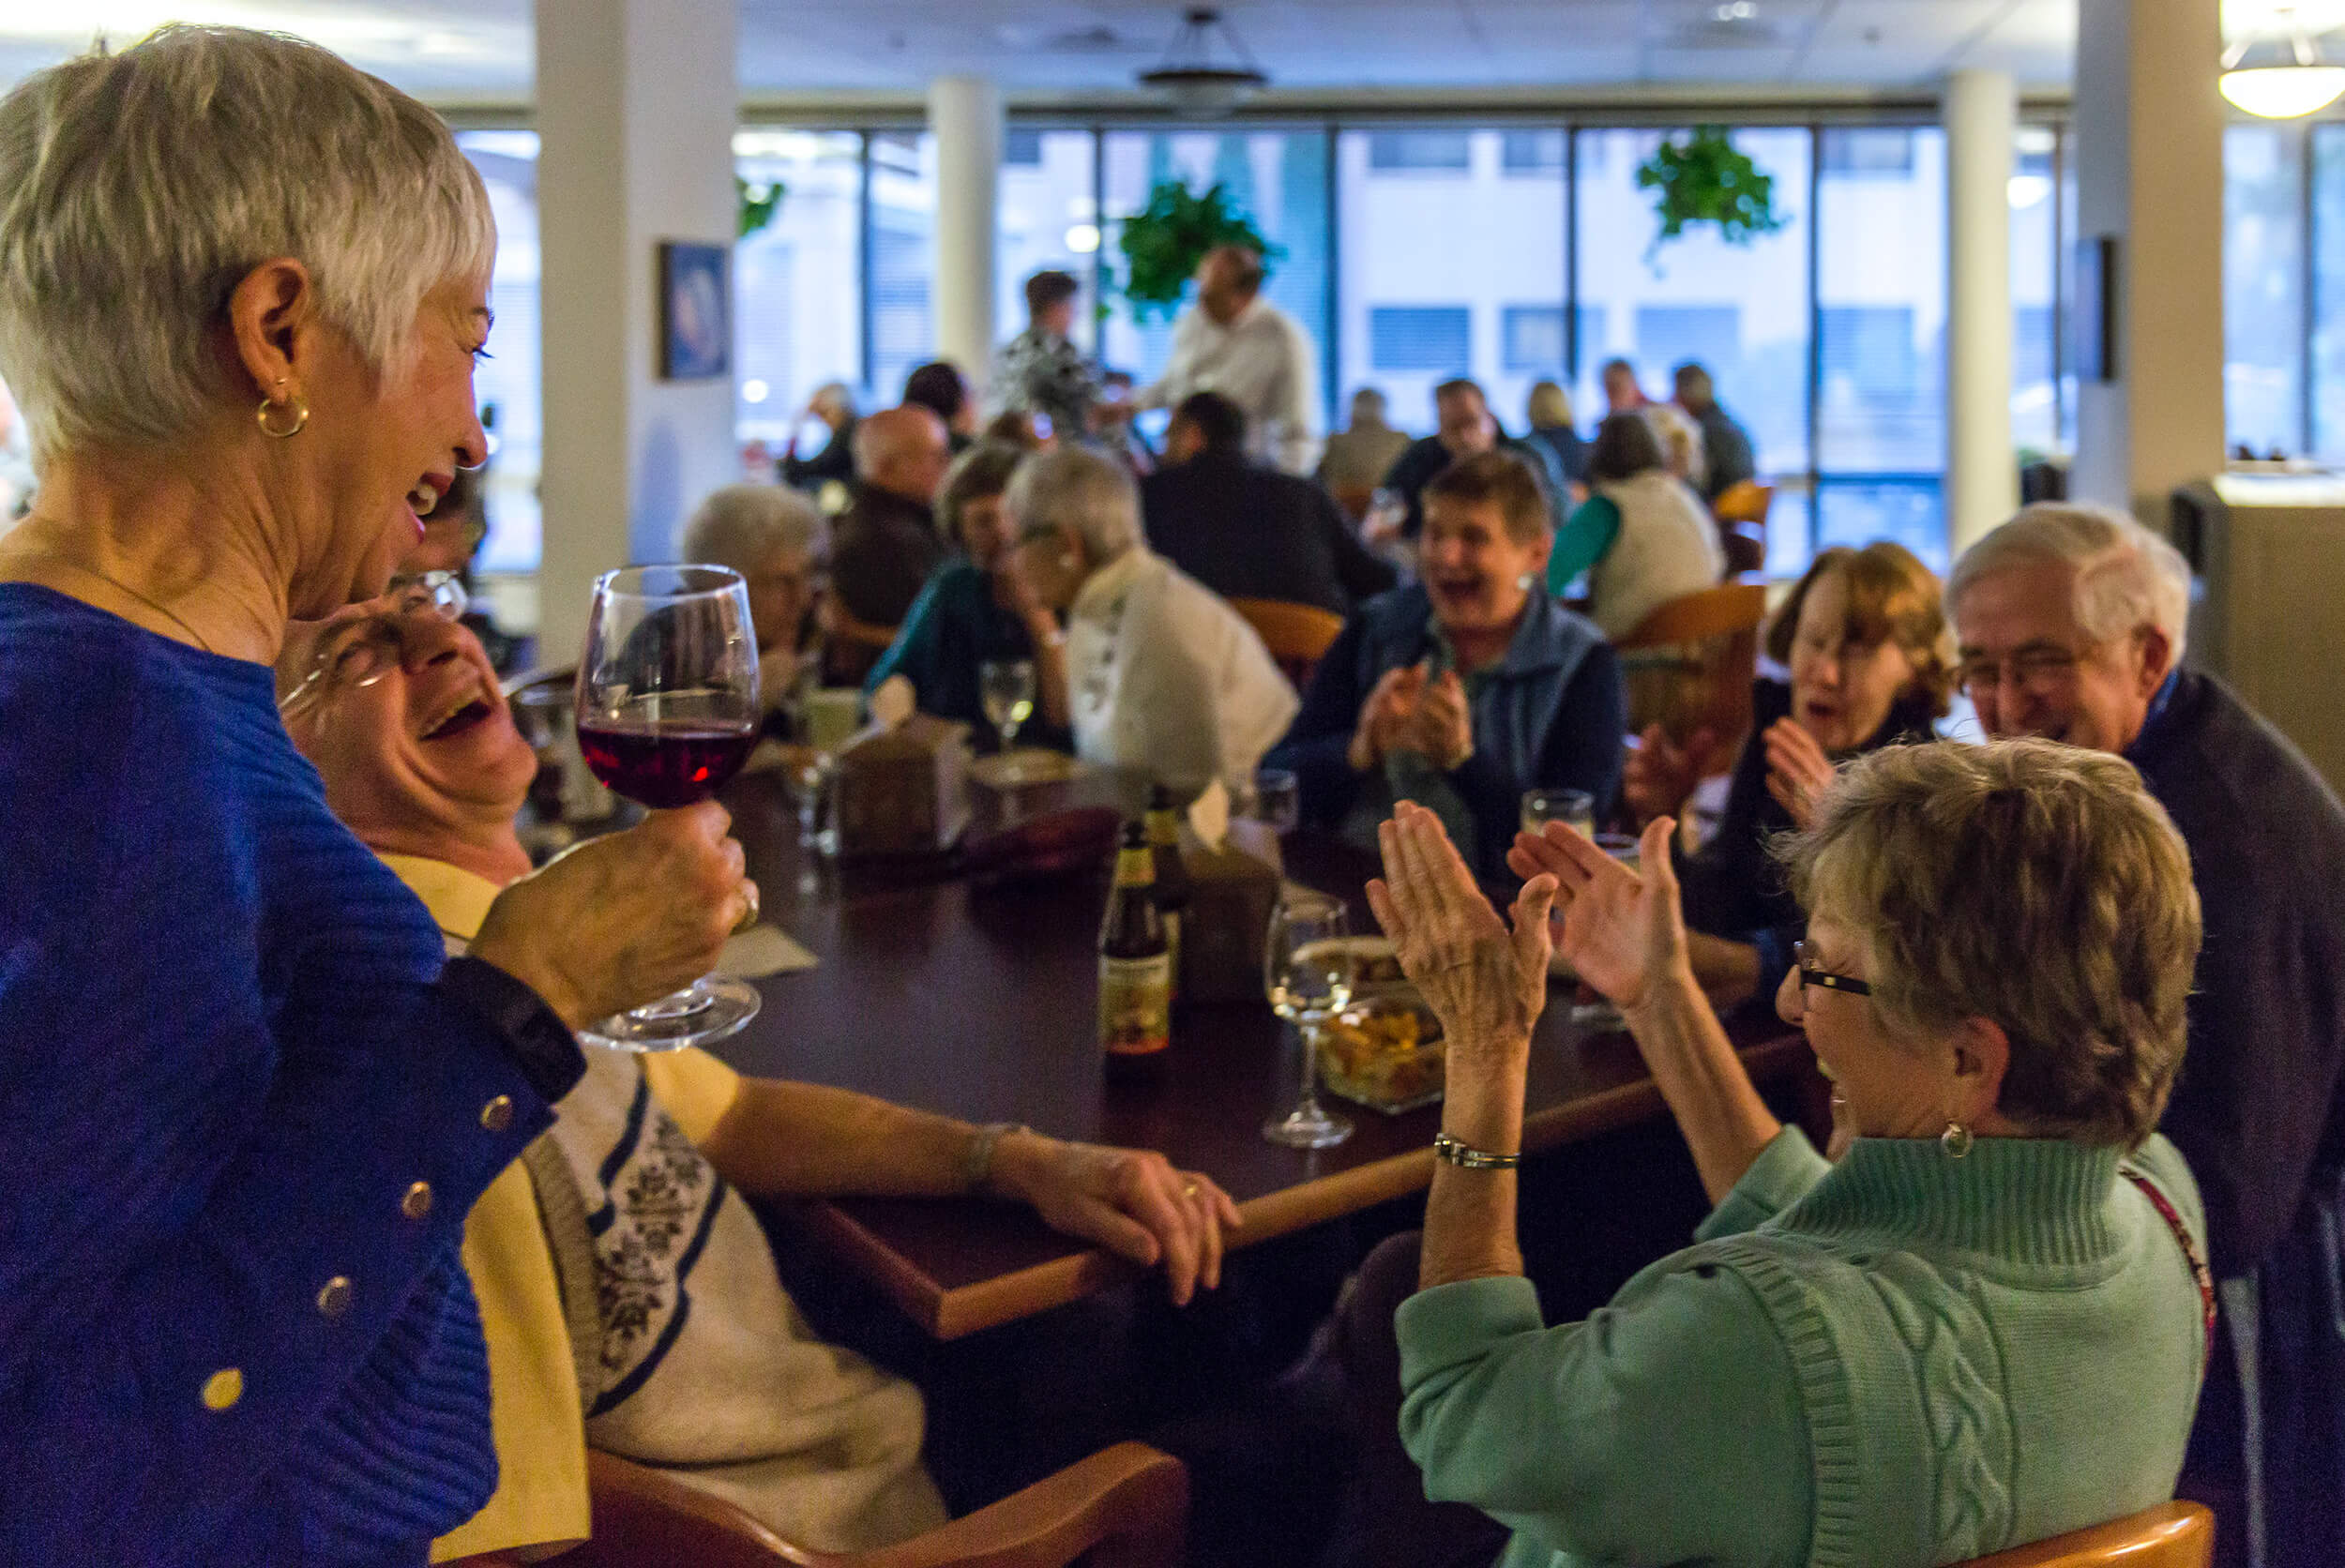 An active dining event at Willamette view with a woman holding a glass of wine in the foreground